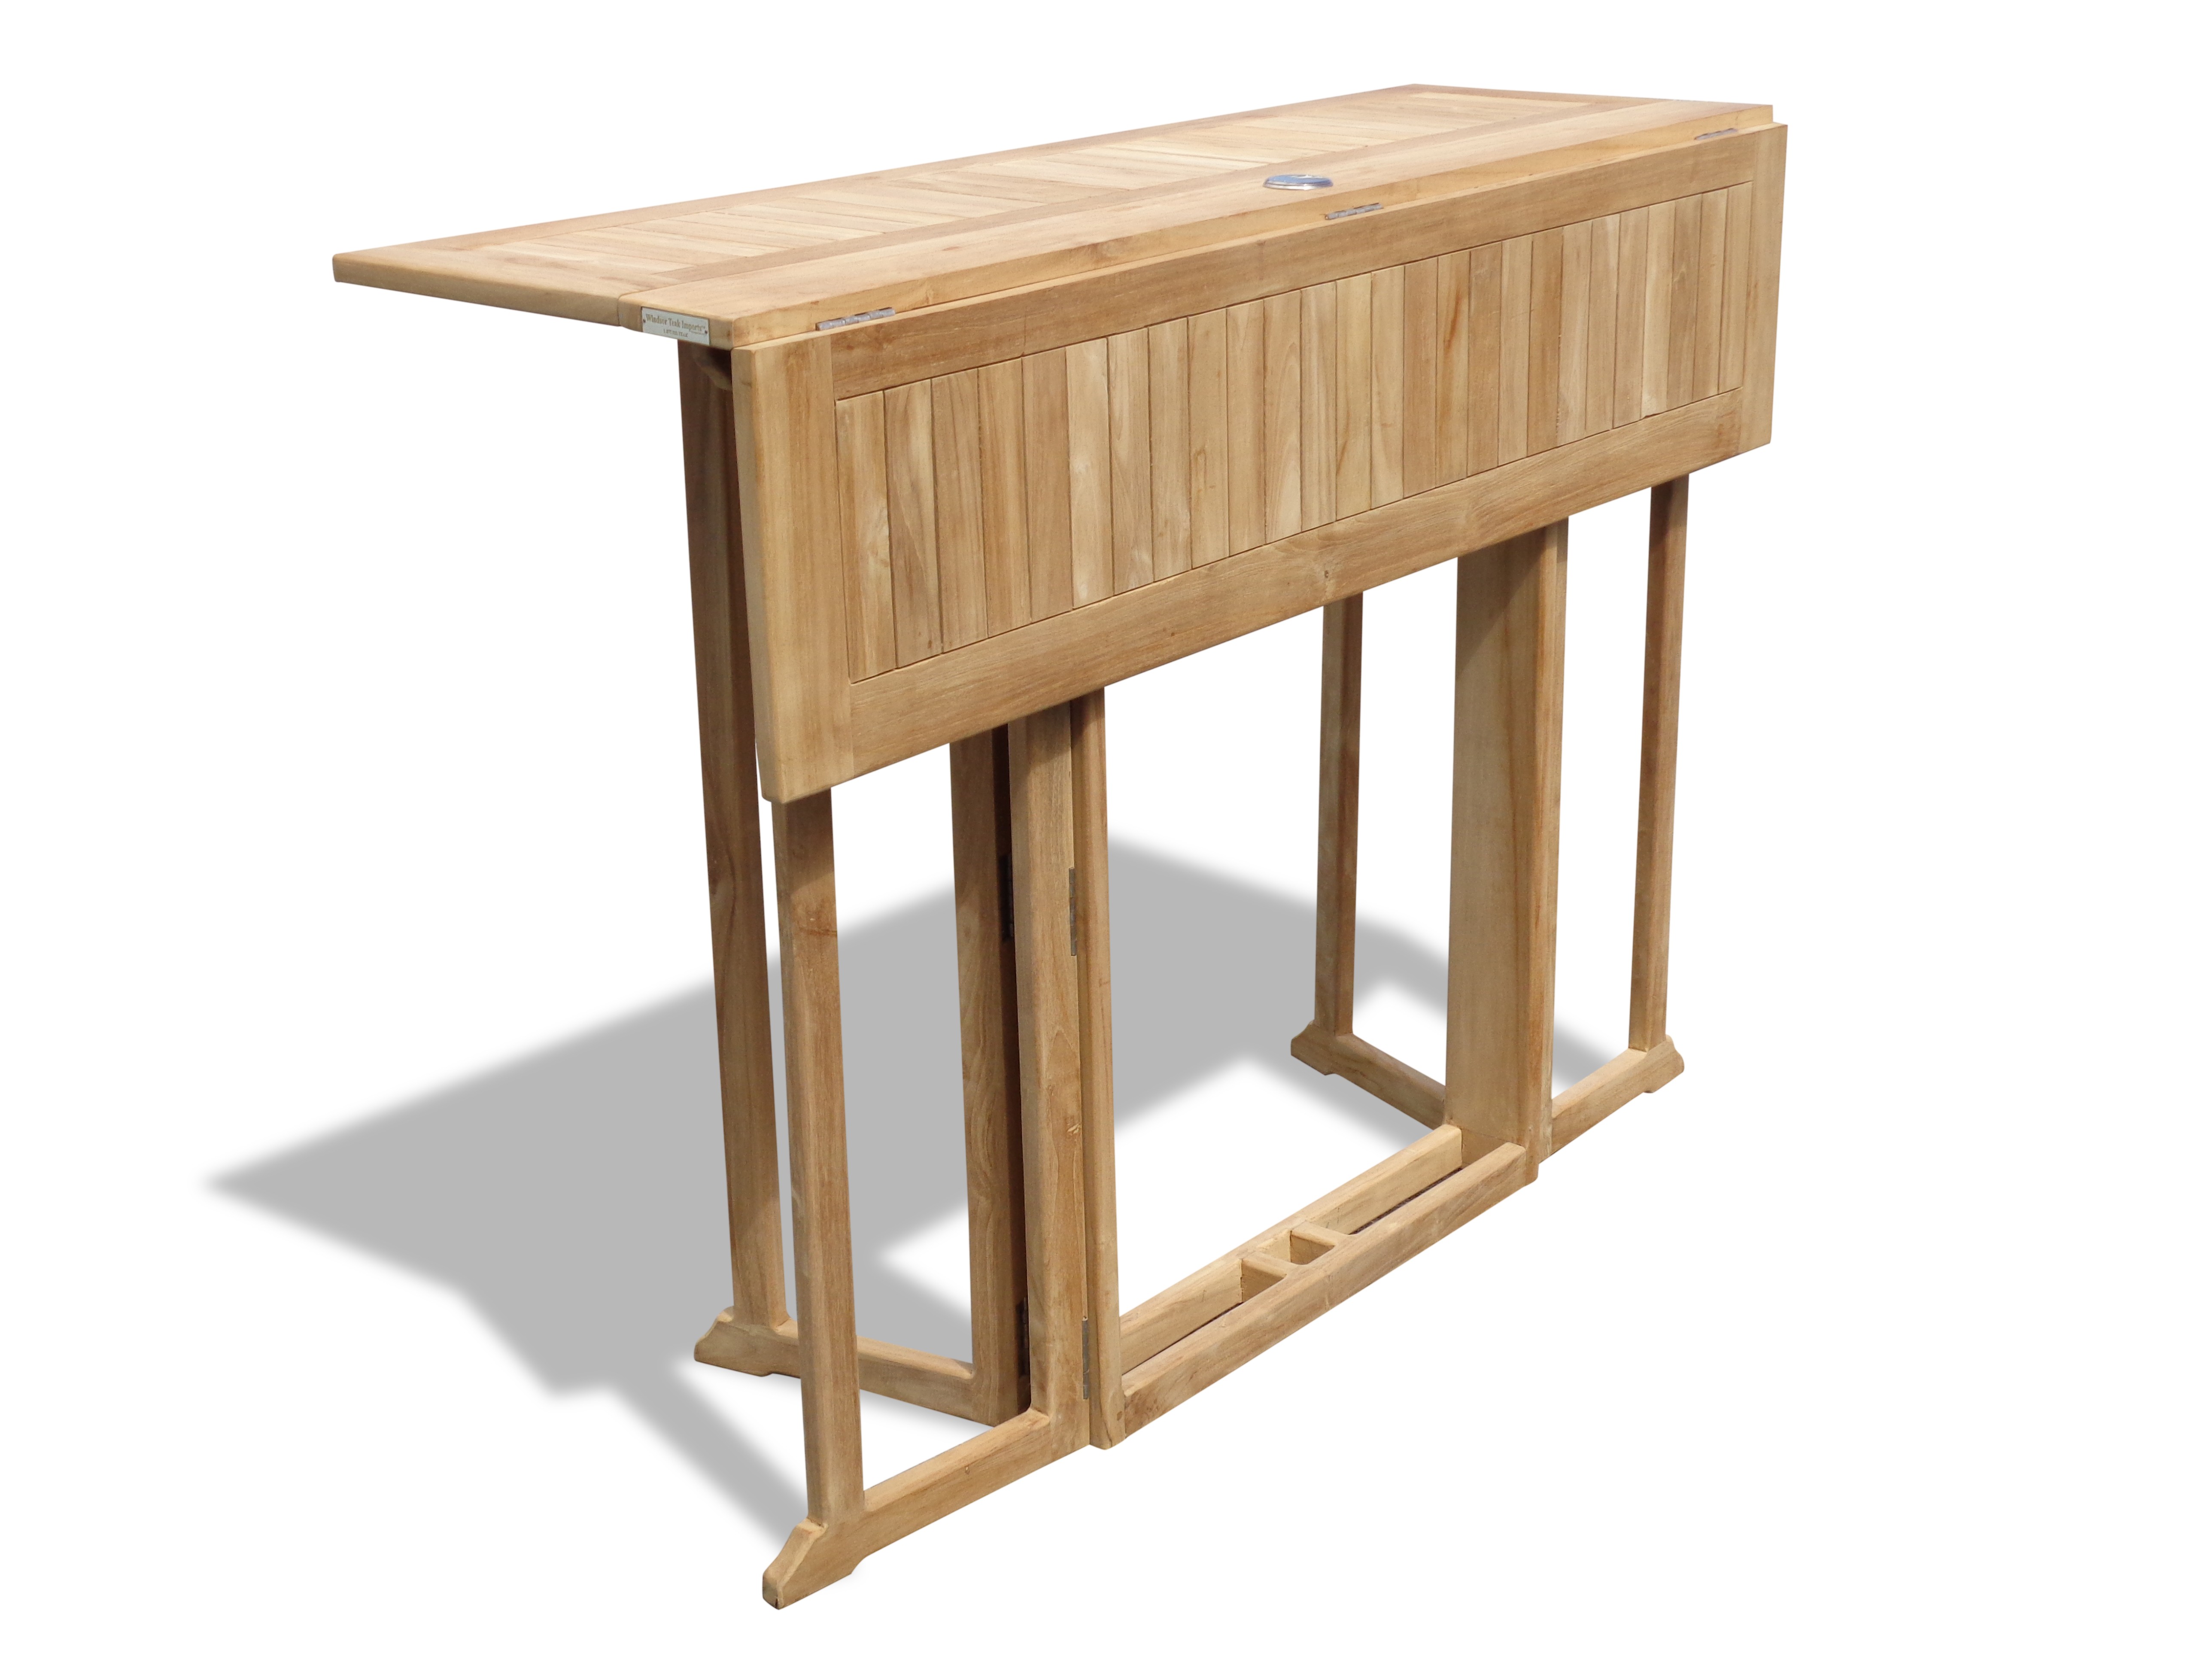 Bimini 59" x 31" Rectangular Teak Drop Leaf Folding Counter Table...use with 1 Leaf Up or 2.... Makes 2 different tables (Counter Height is 5" Lower then Bar)